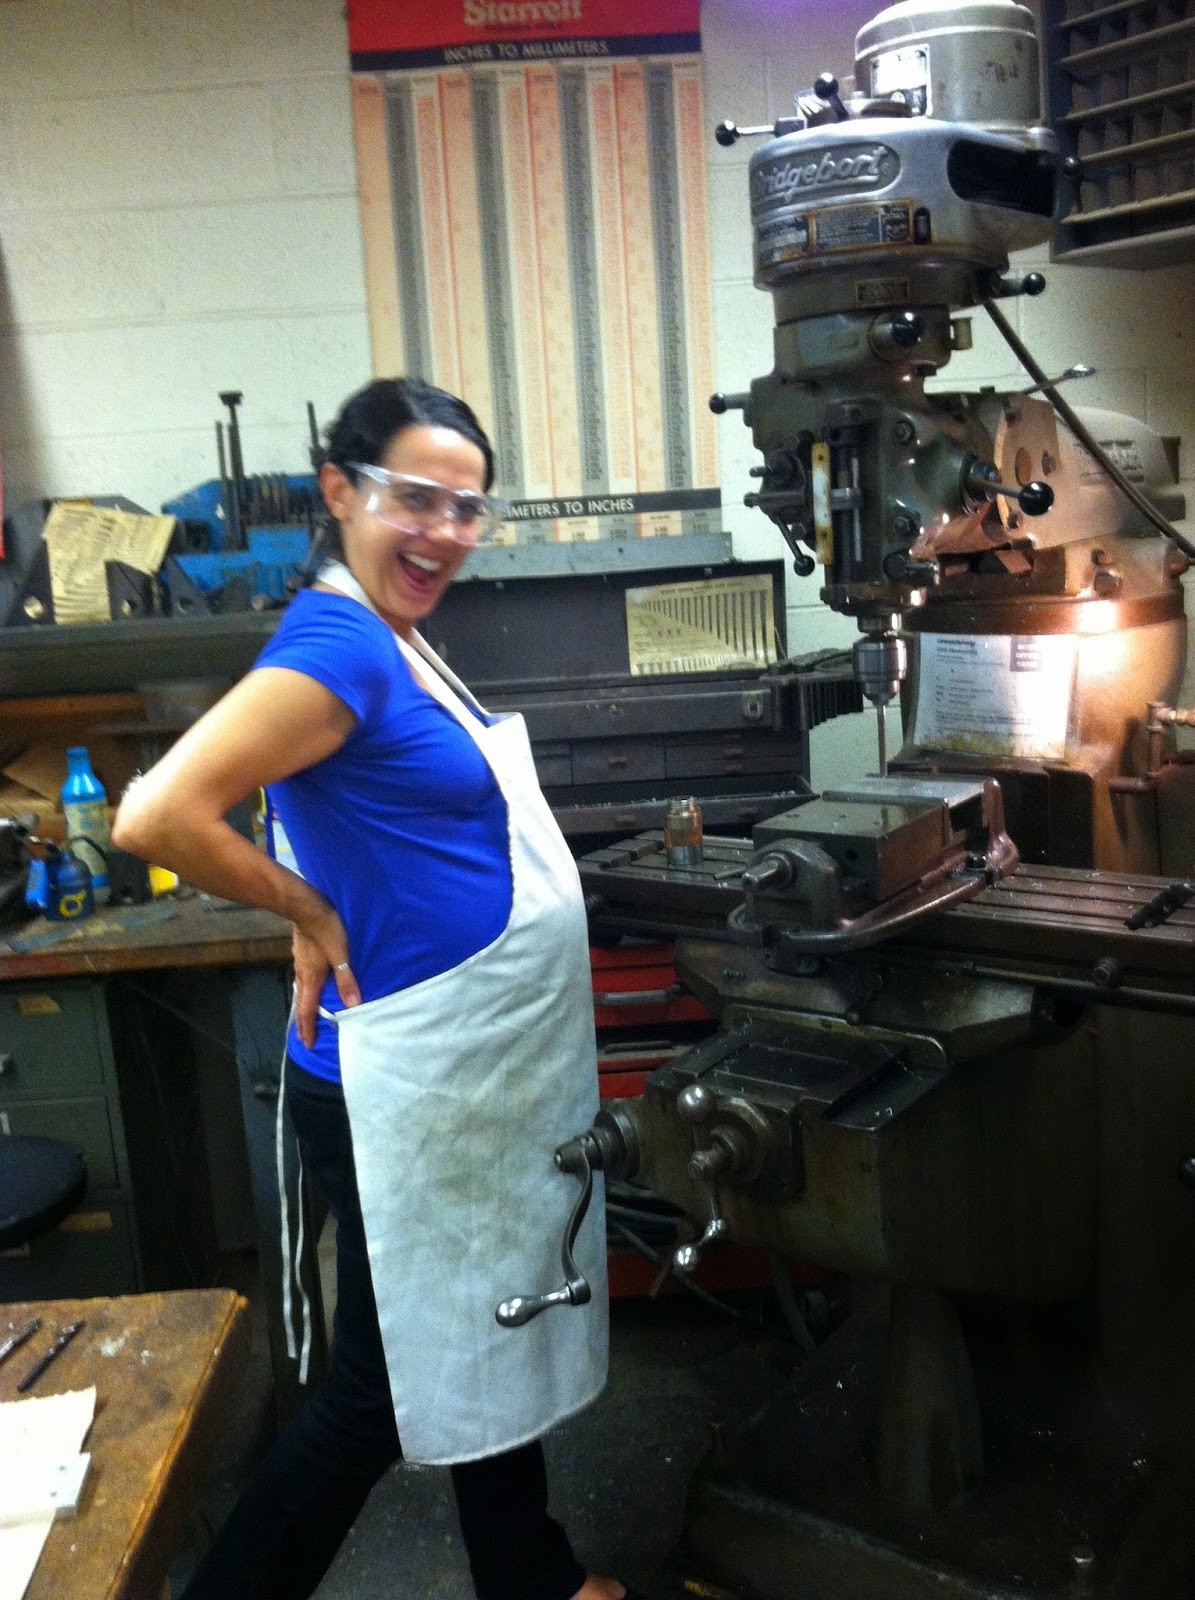 Christine McCarthy doing some light machining while heavily pregnant (2013).